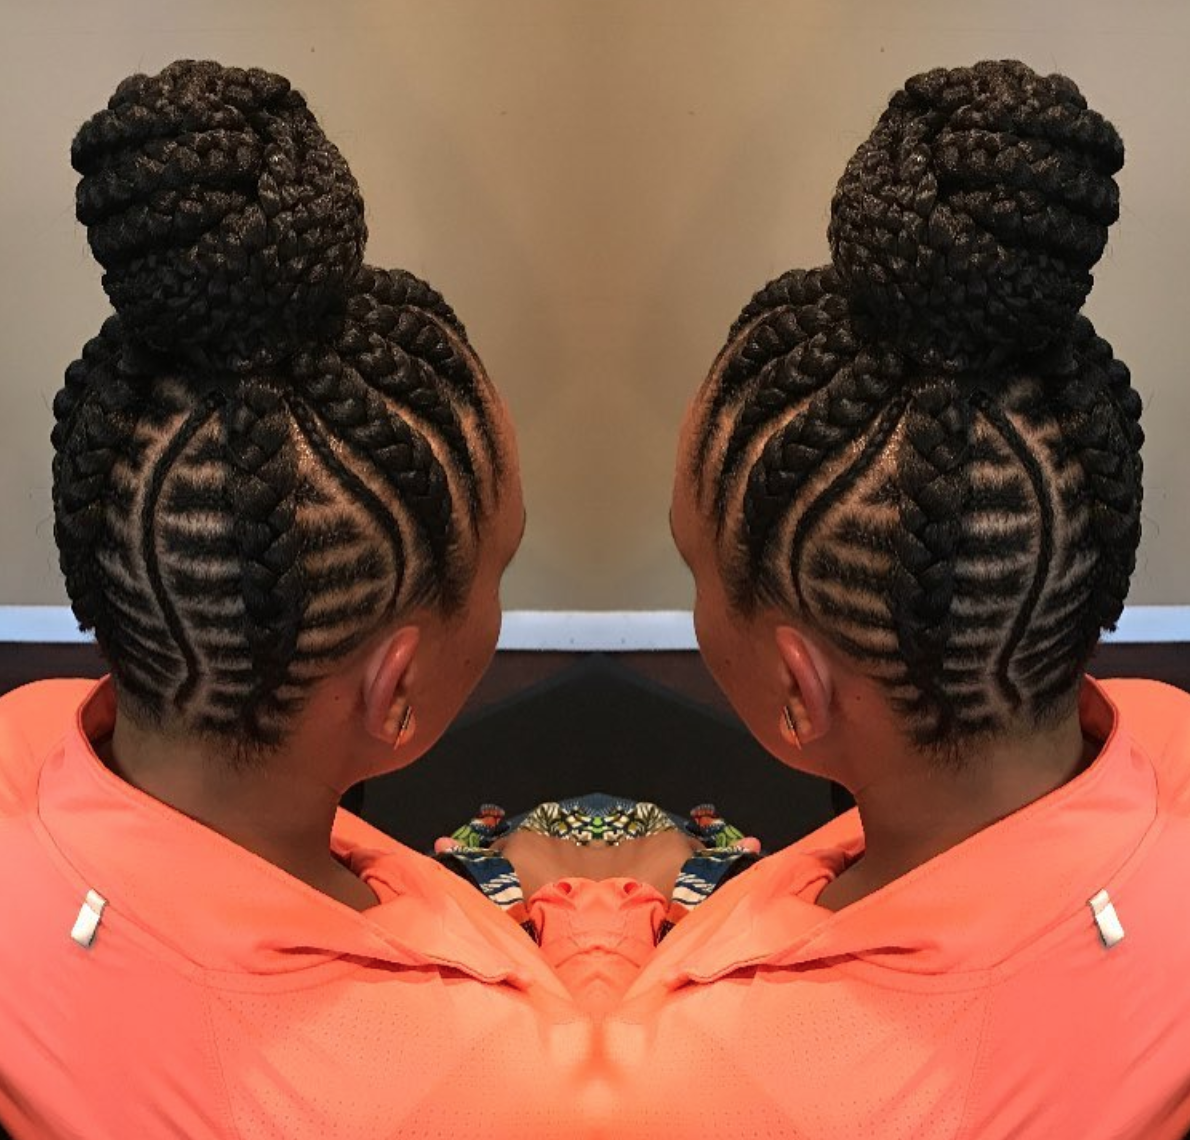 With fishbone braids and an elegant wrapped bun, this protective updo looks...